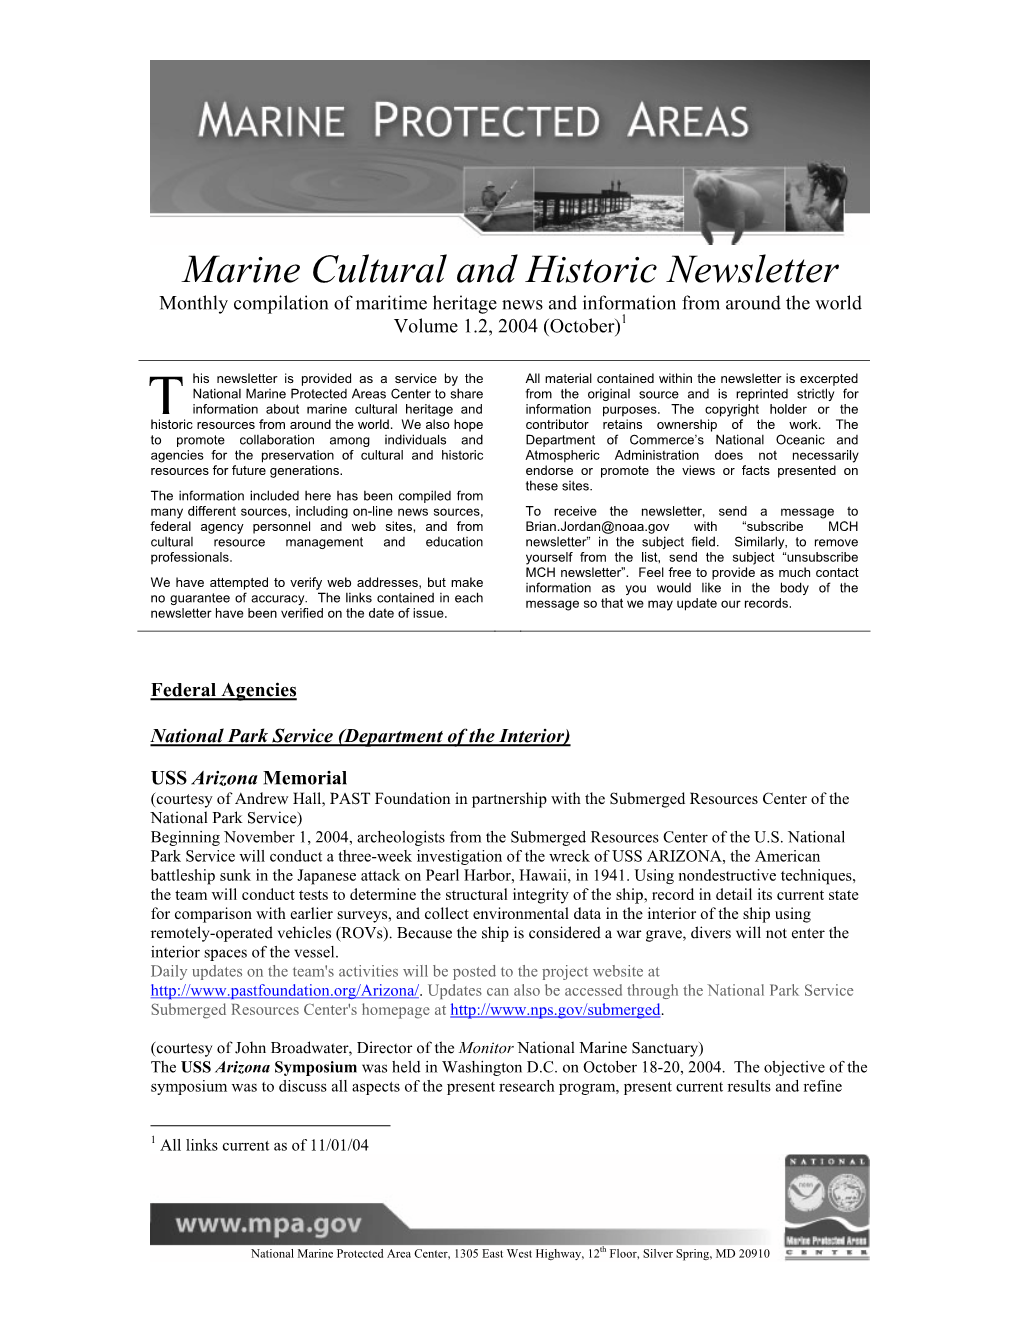 Marine Cultural and Historic Newsletter Monthly Compilation of Maritime Heritage News and Information from Around the World Volume 1.2, 2004 (October)1